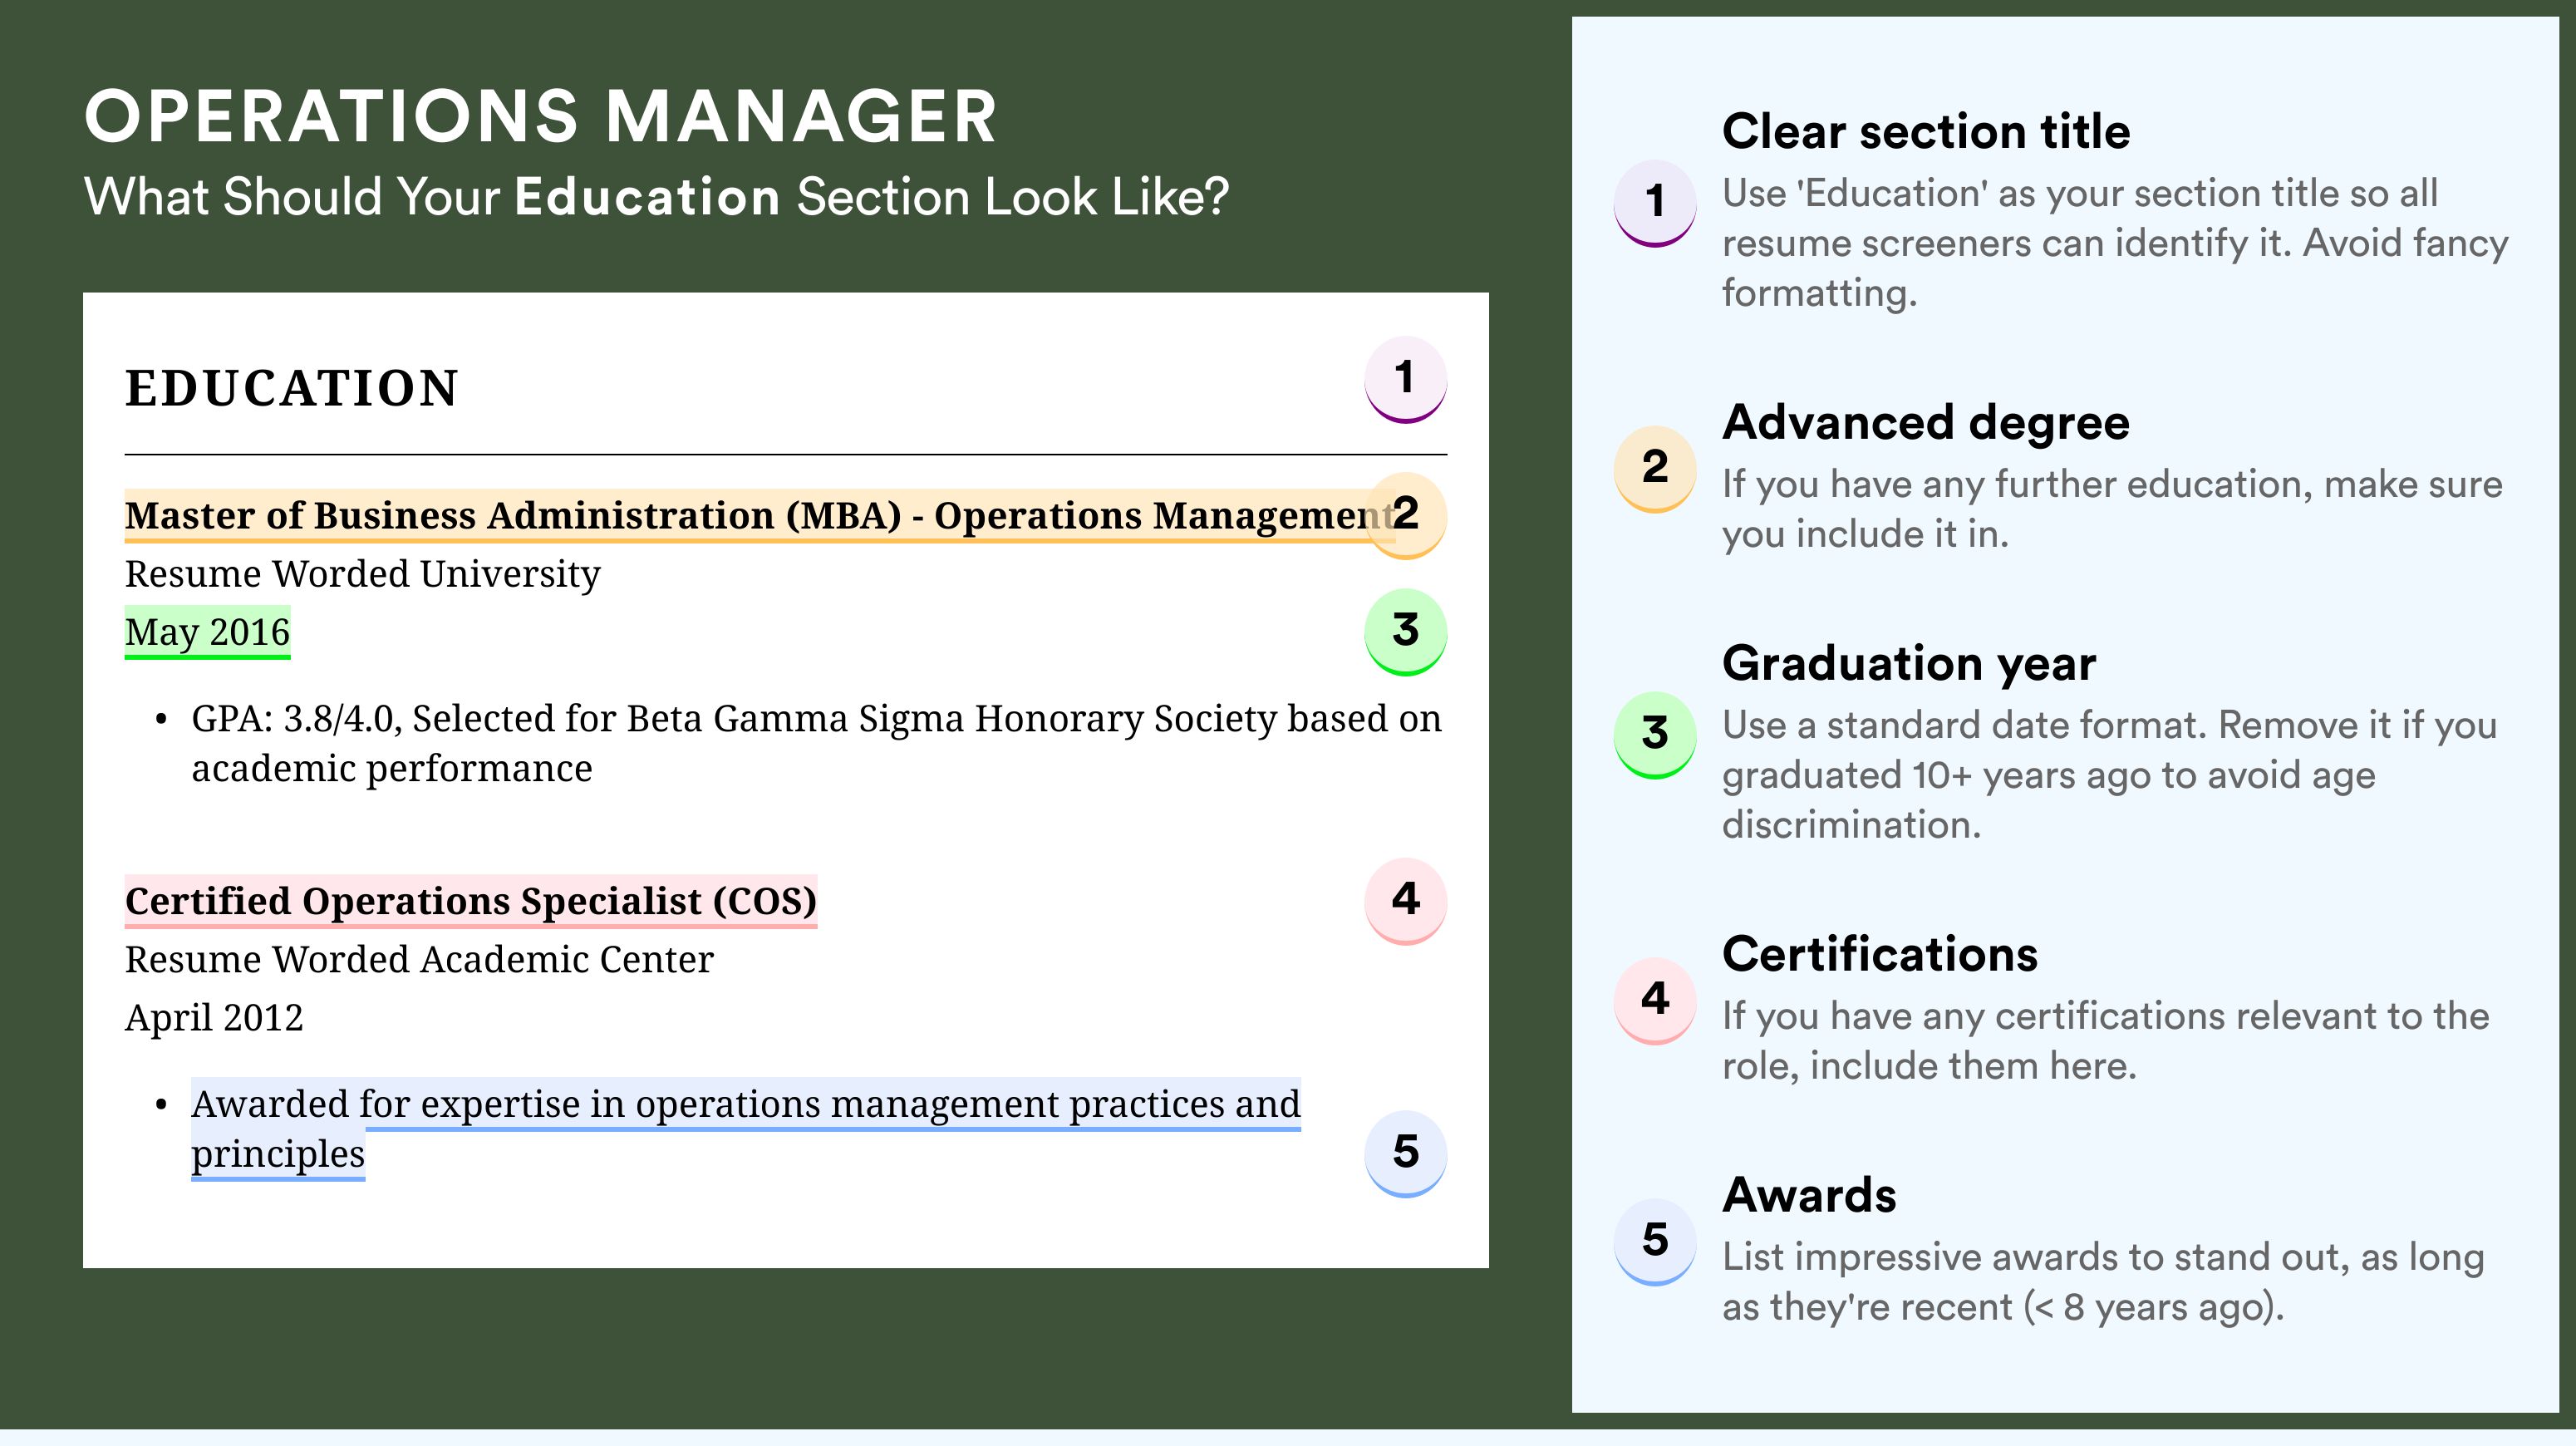 How To Write An Education Section - Operations Manager Roles